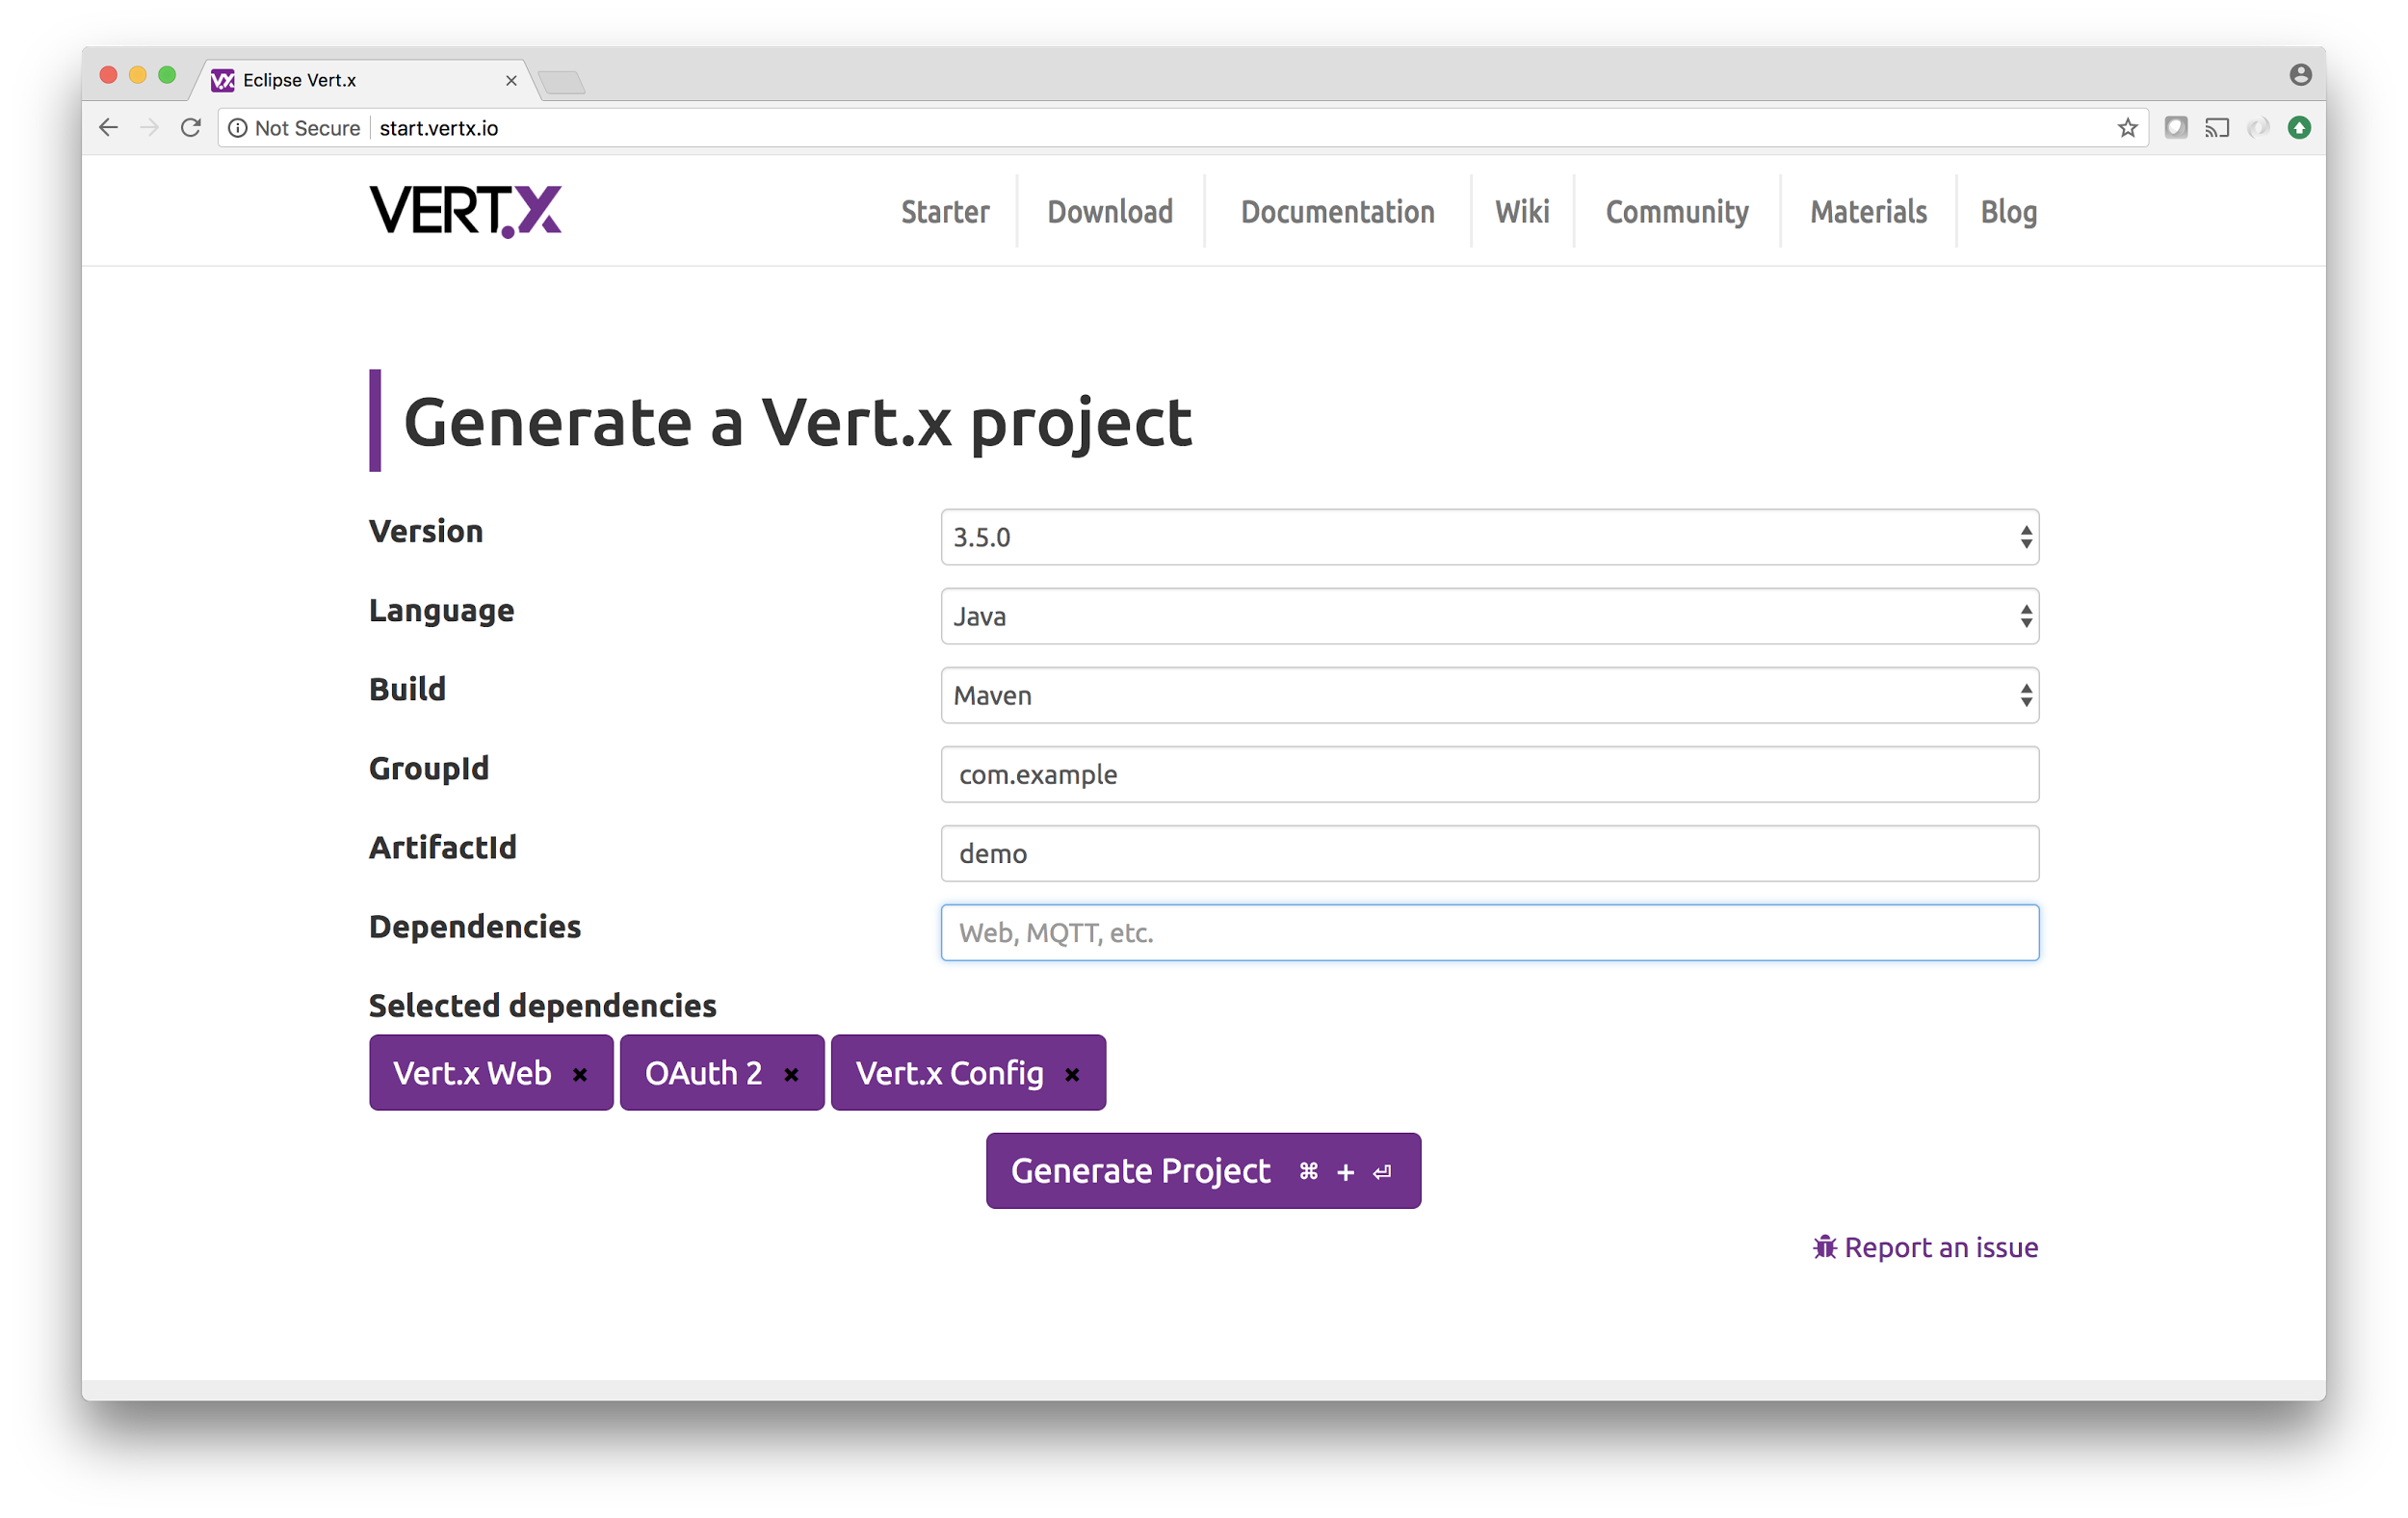 Generate a Vert.x project